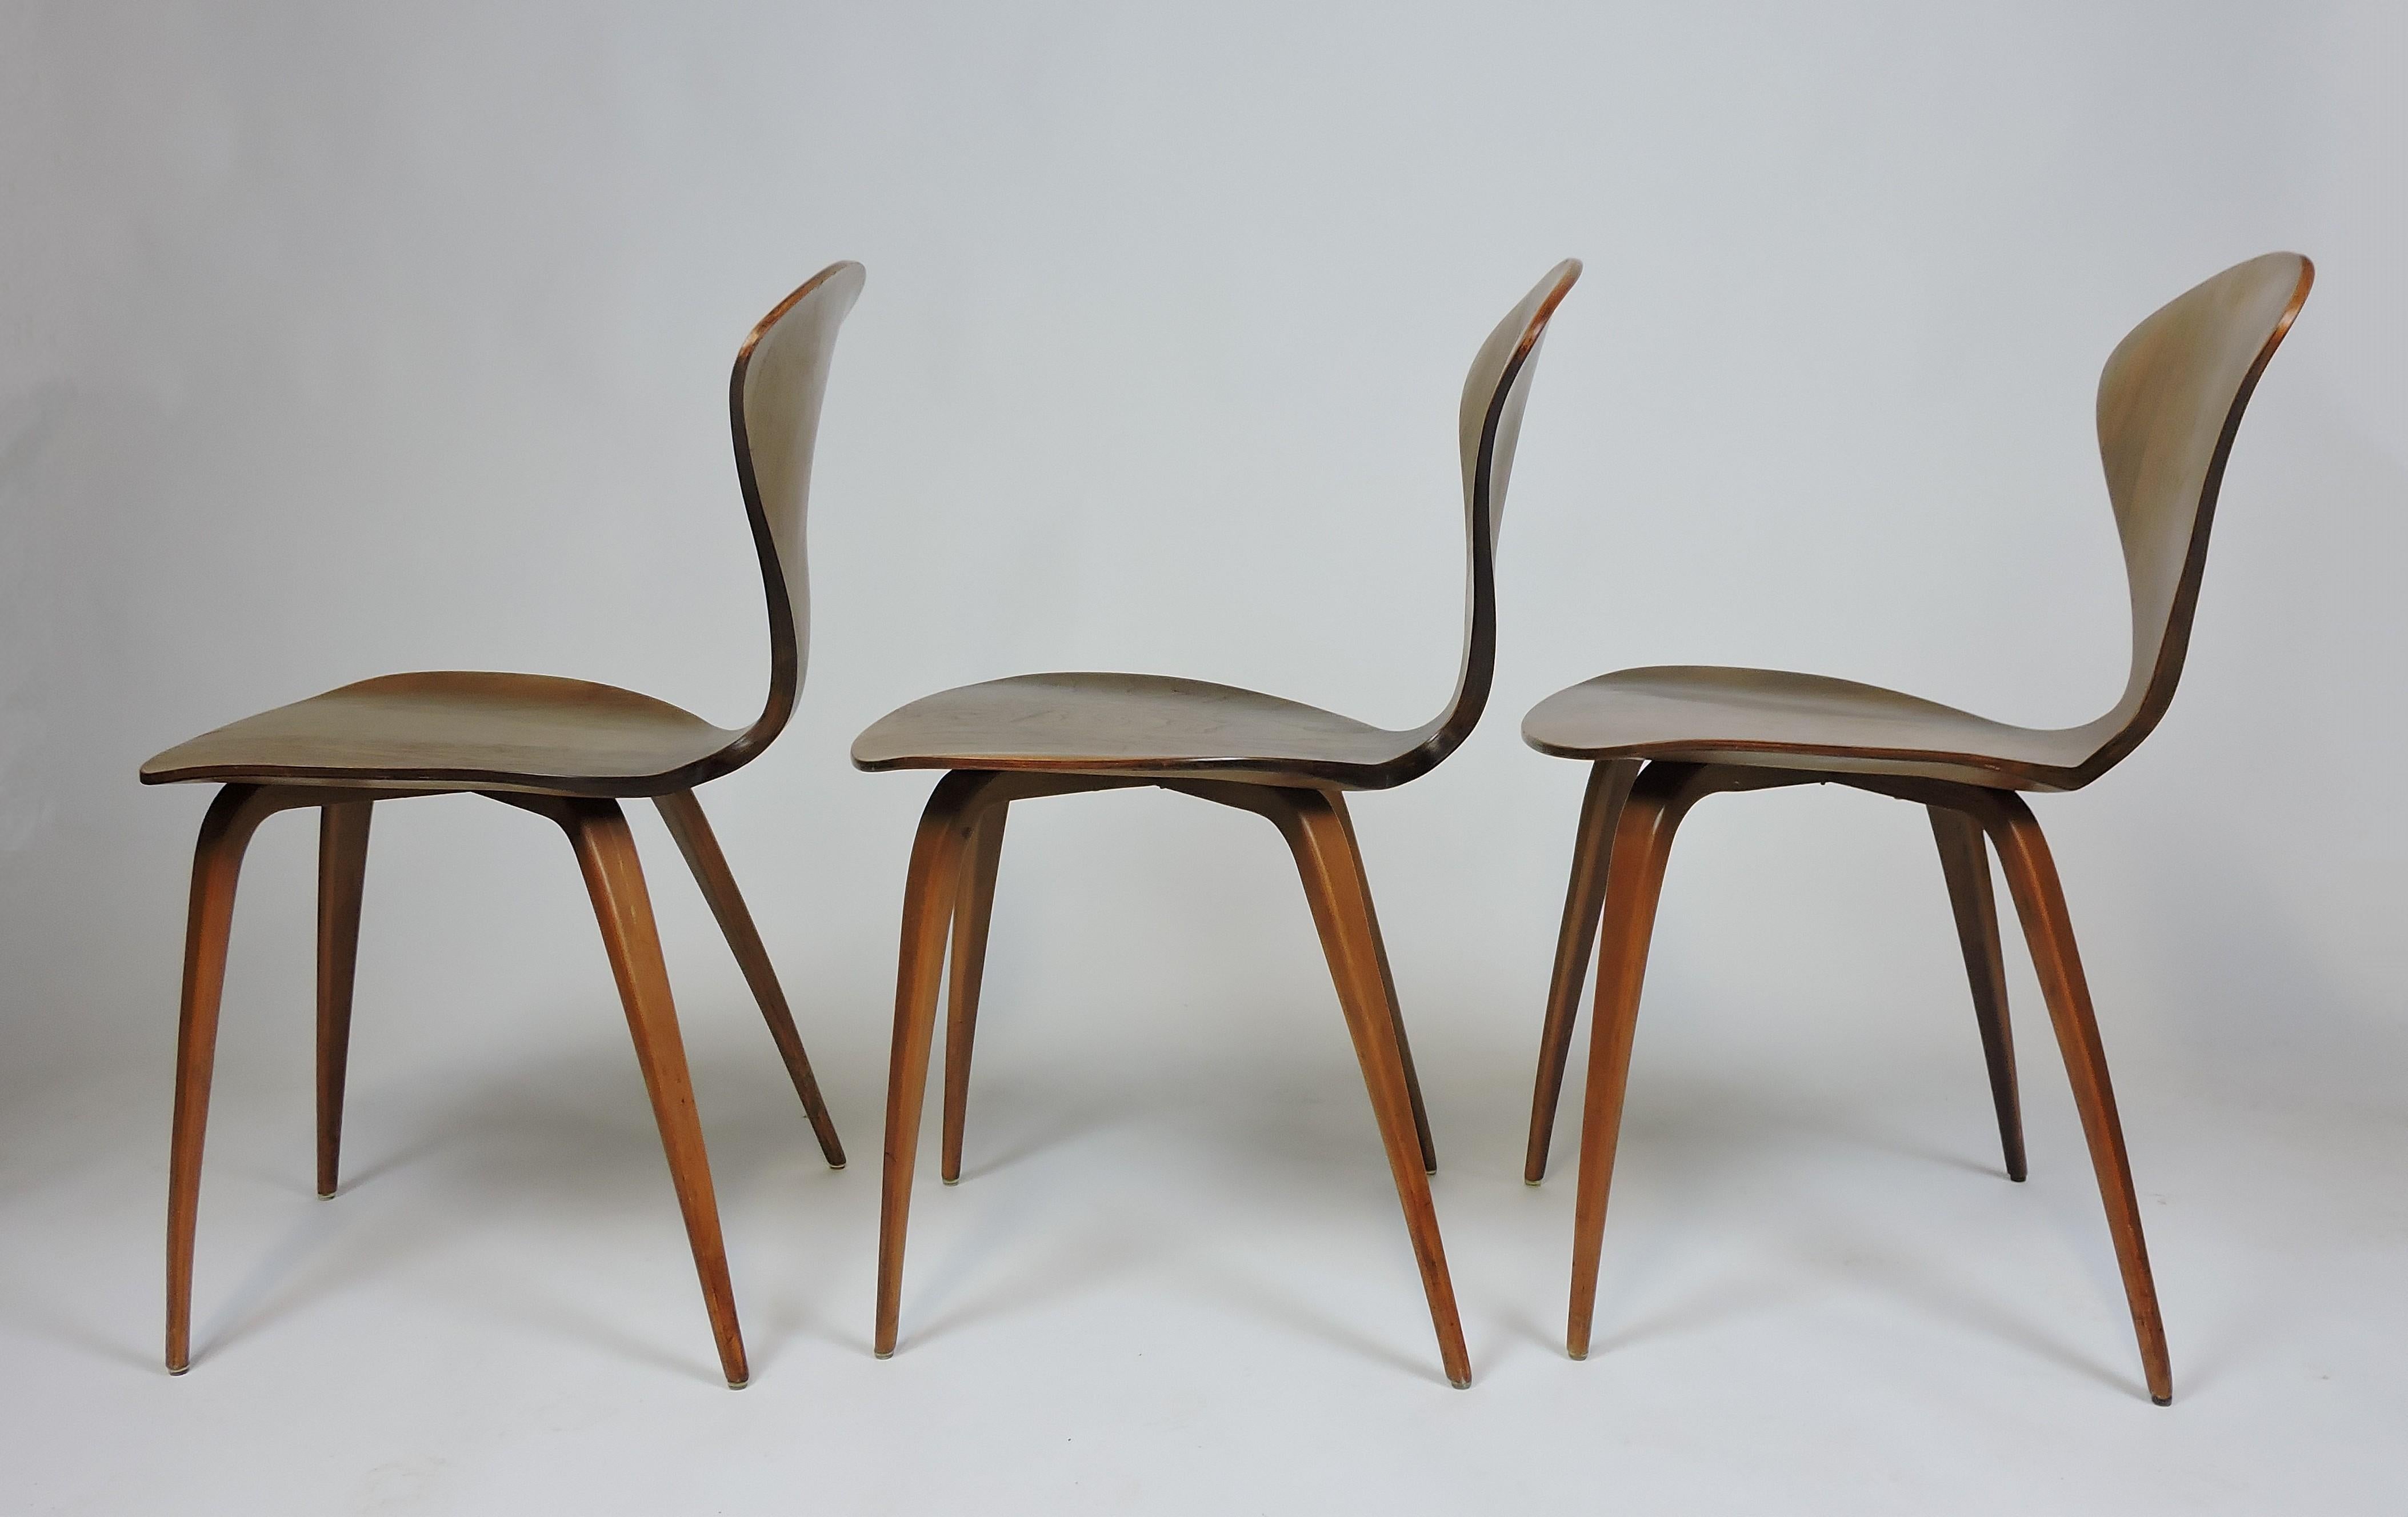 American Set of Three Original Cherner Mid-Century Modern Dining or Side Chairs, 1960s